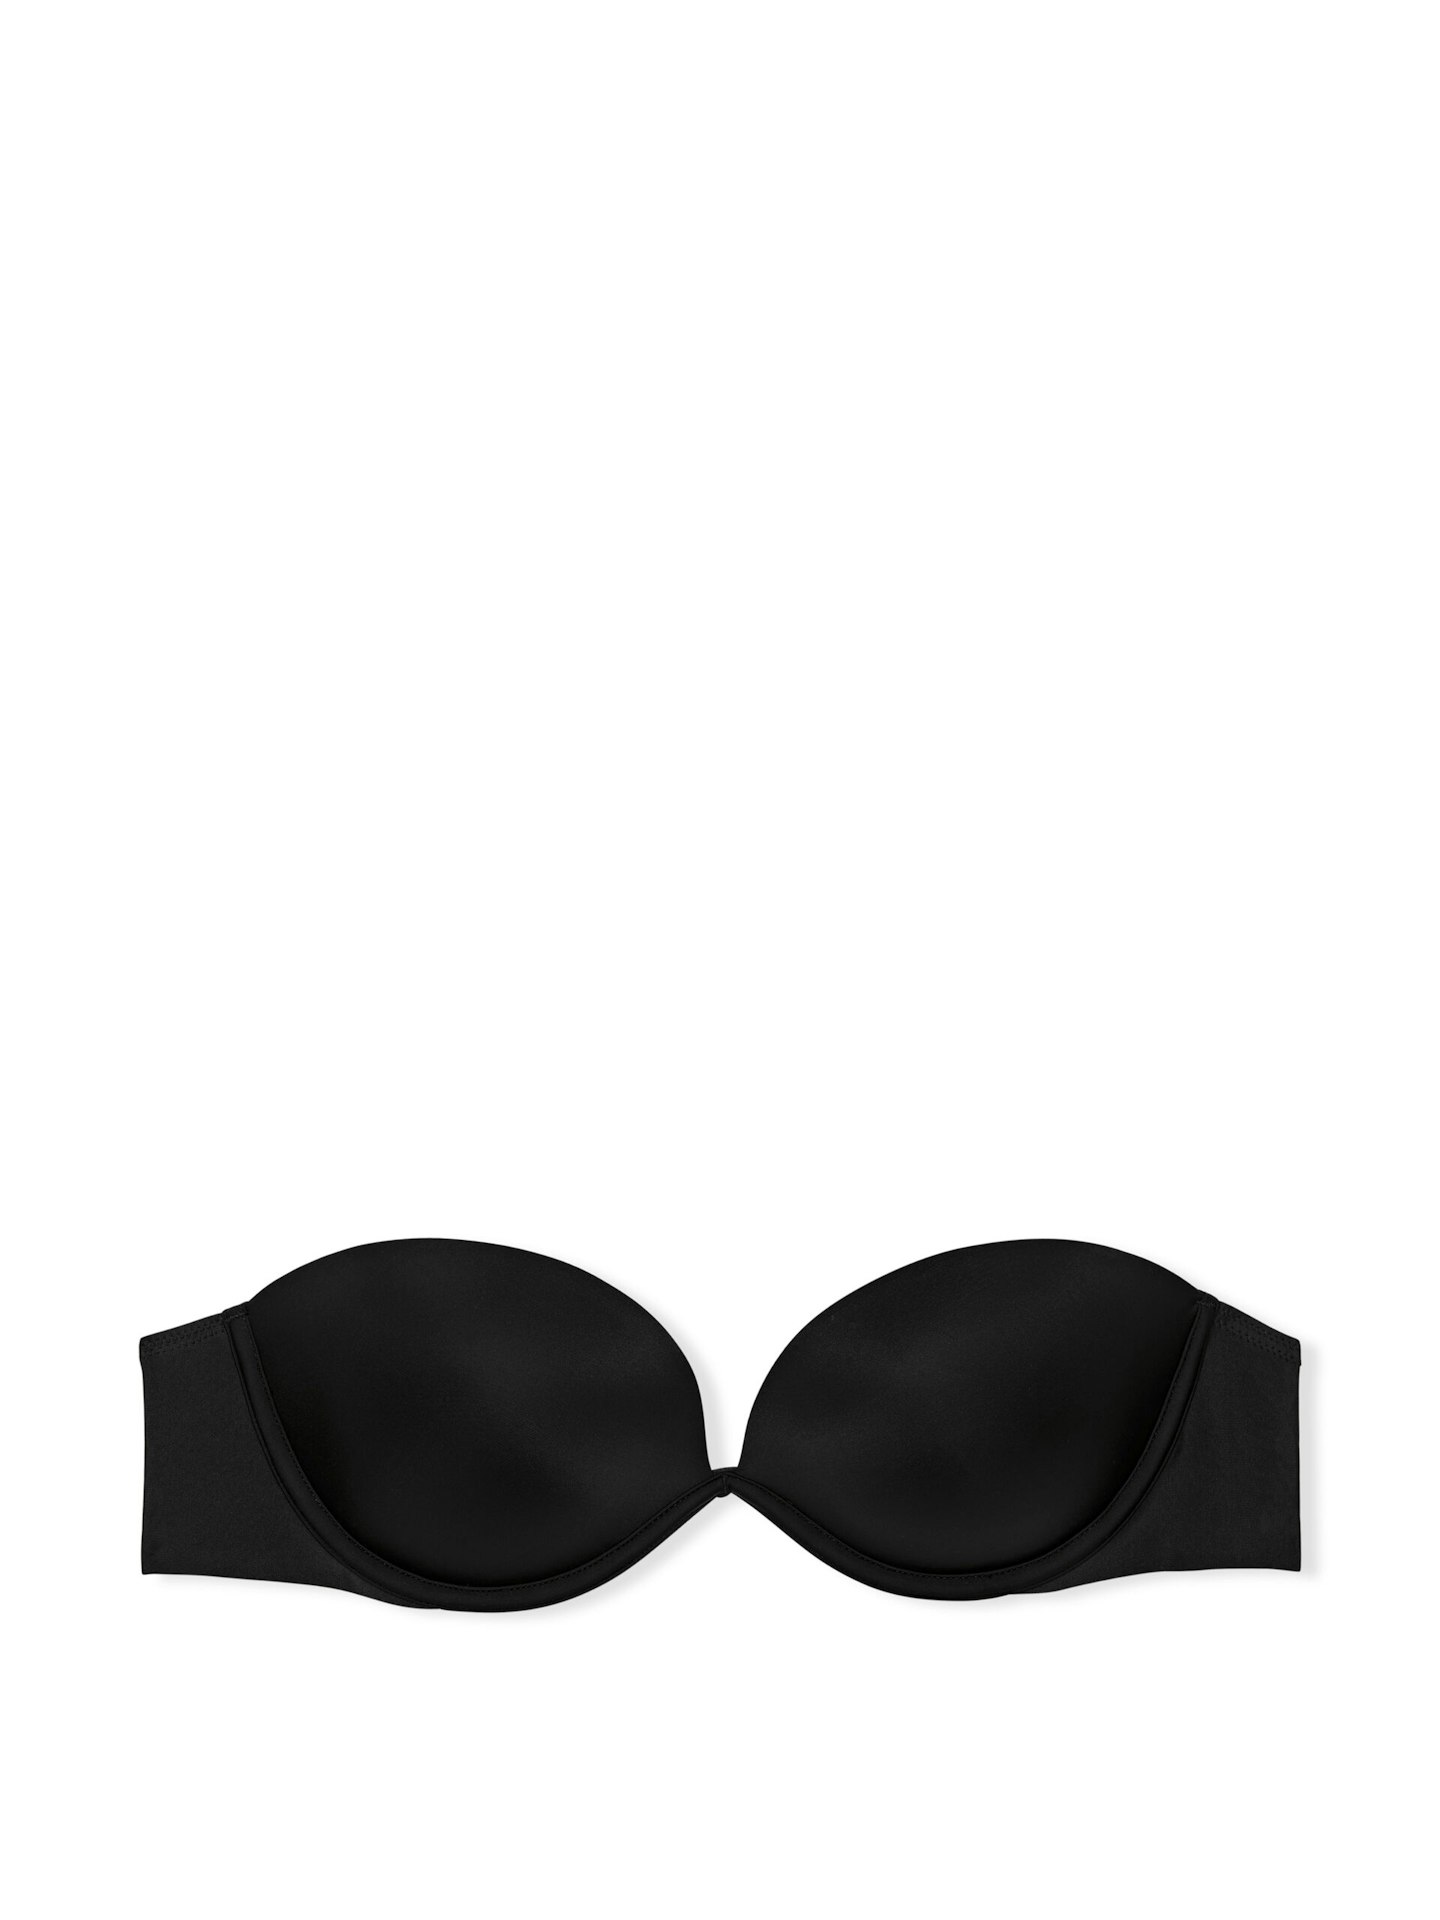 Victoria's Secret Every Way Bra: Here's Why It's The Only Bra You Need